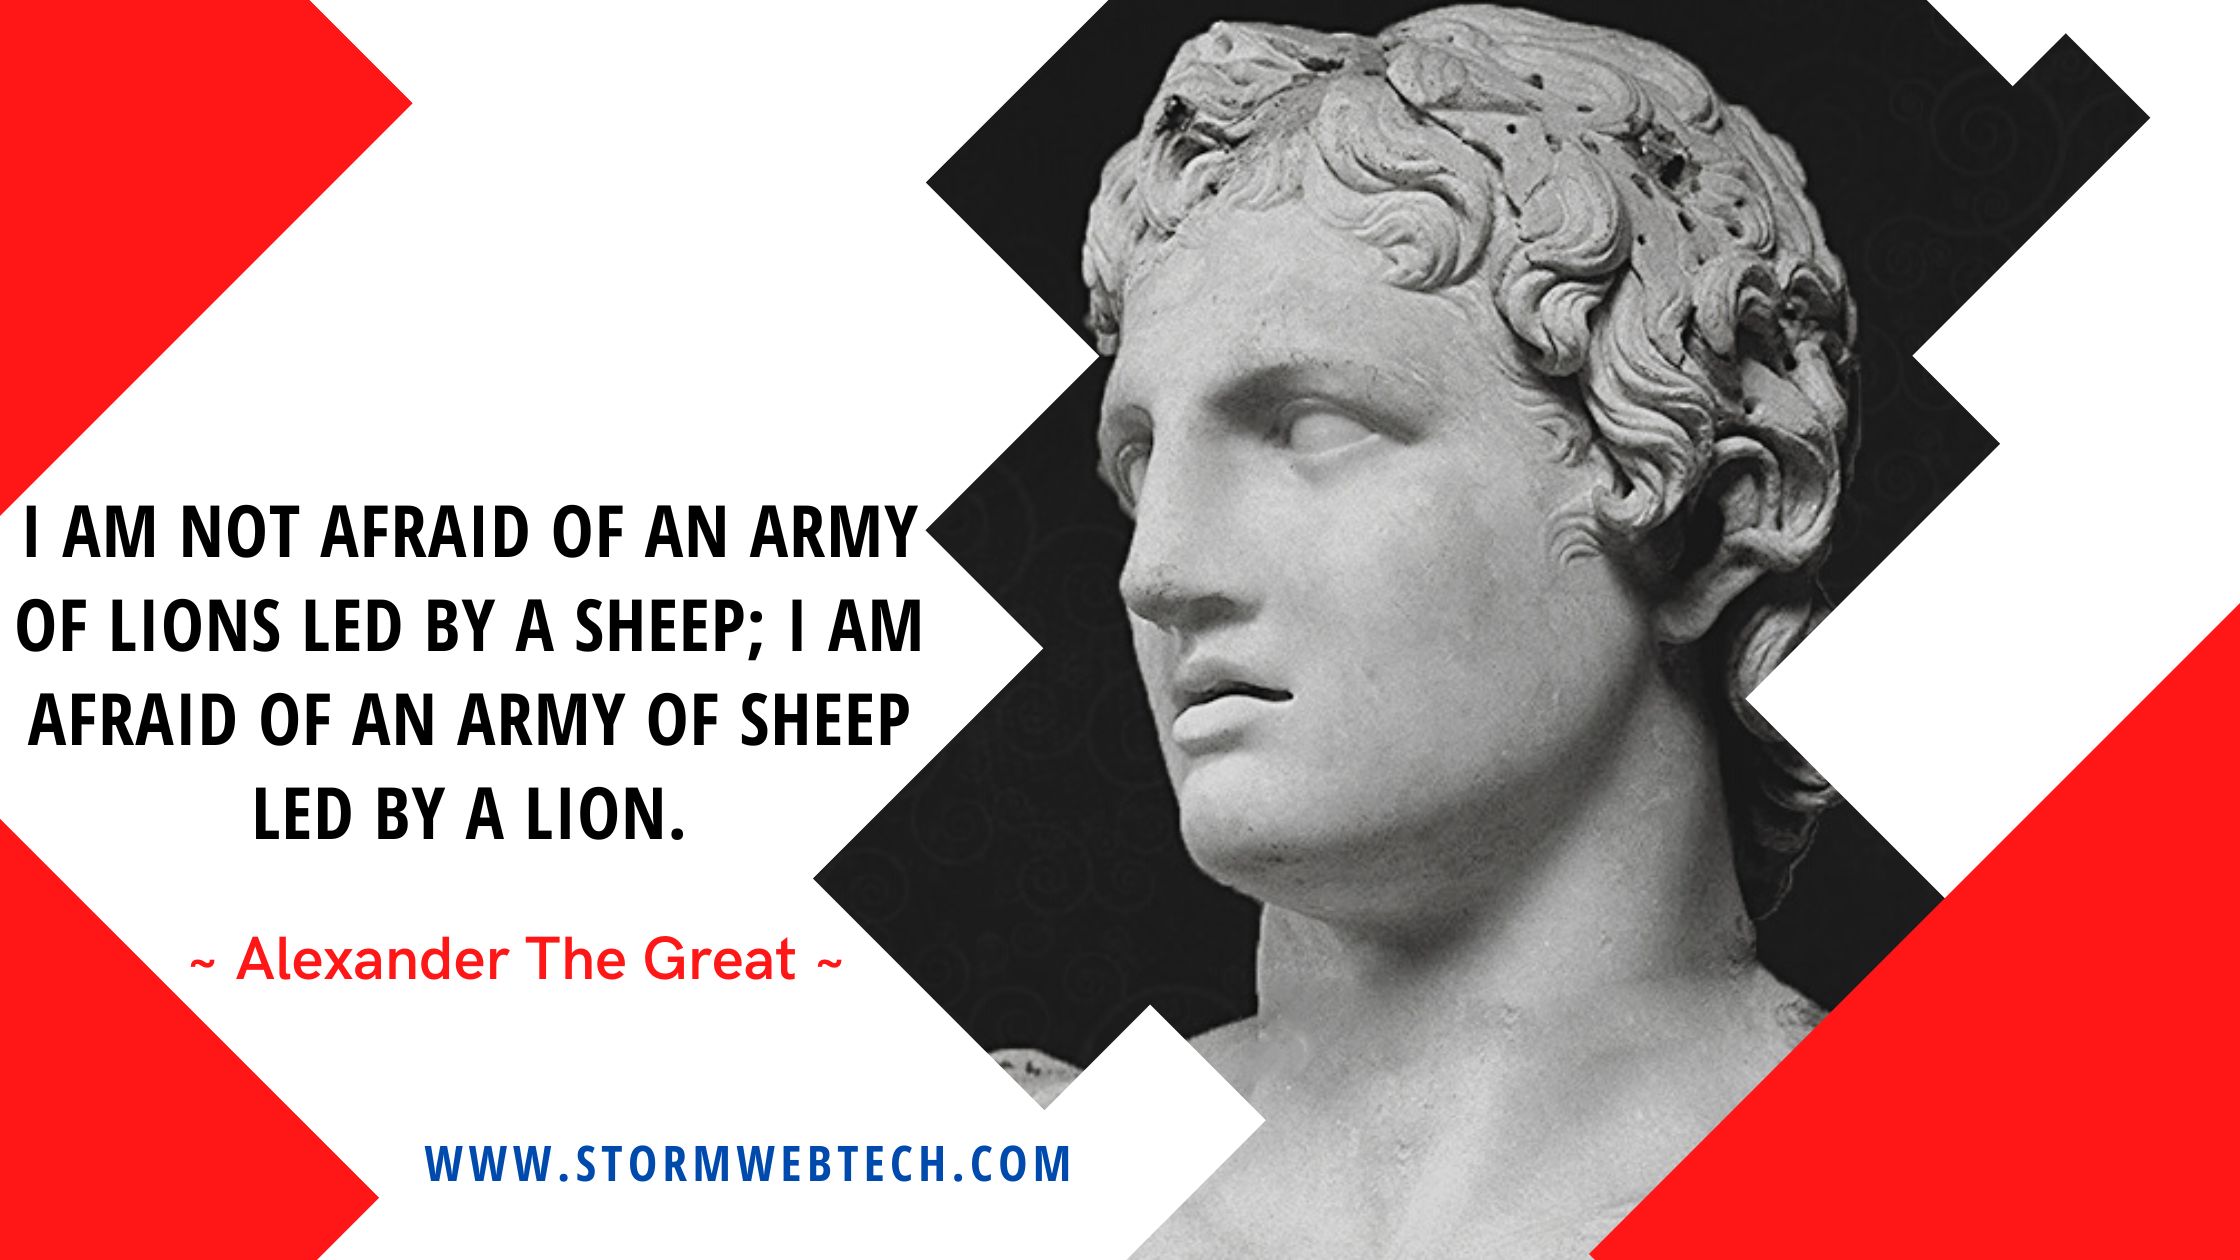 alexander the great quotes for success in life, alexander the great famous quotes, quotes of alexander the great, quotes by alexander the great